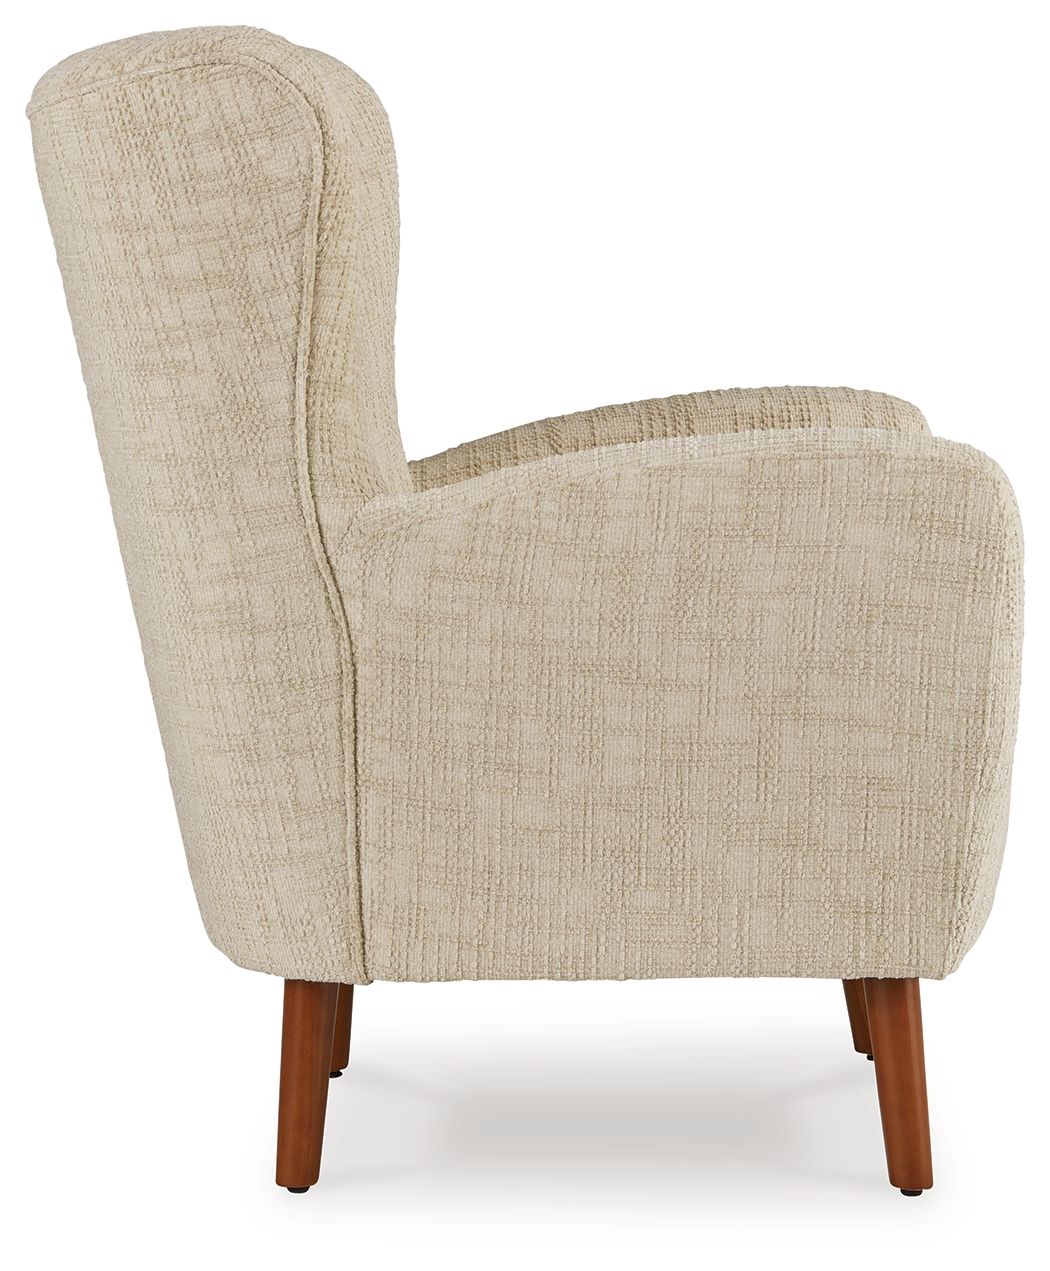 Jemison Next-gen Nuvella - Dune - Accent Chair - Tony's Home Furnishings